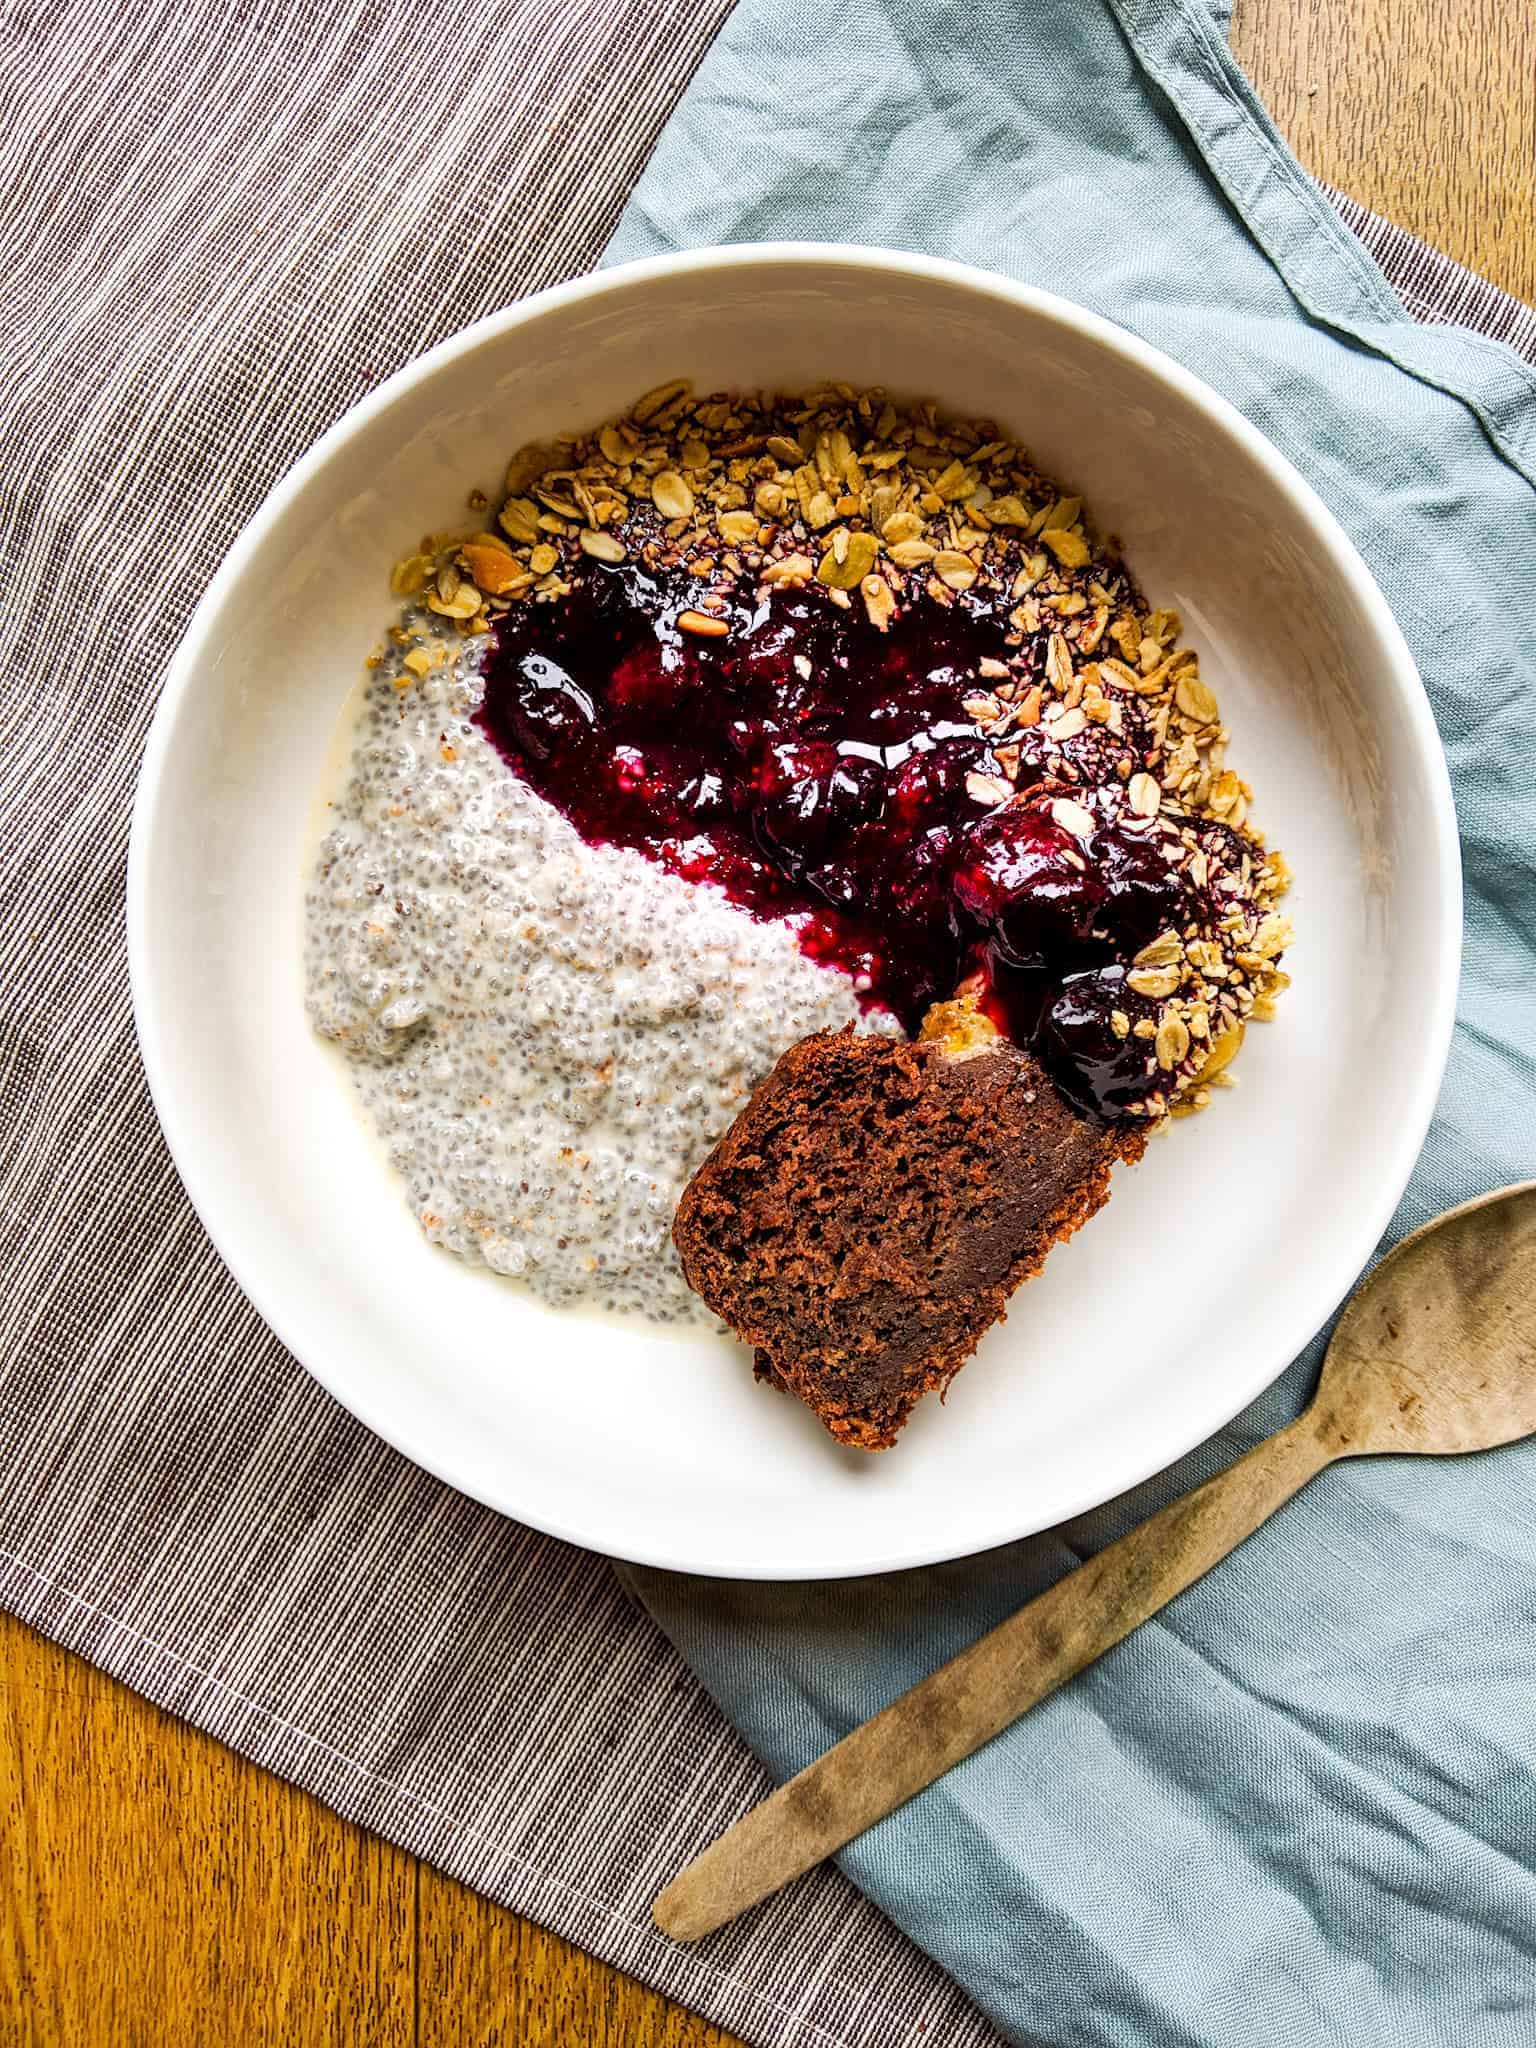 chia seed pudding with stewed berries in a white bowl with a wooden spoon beside it